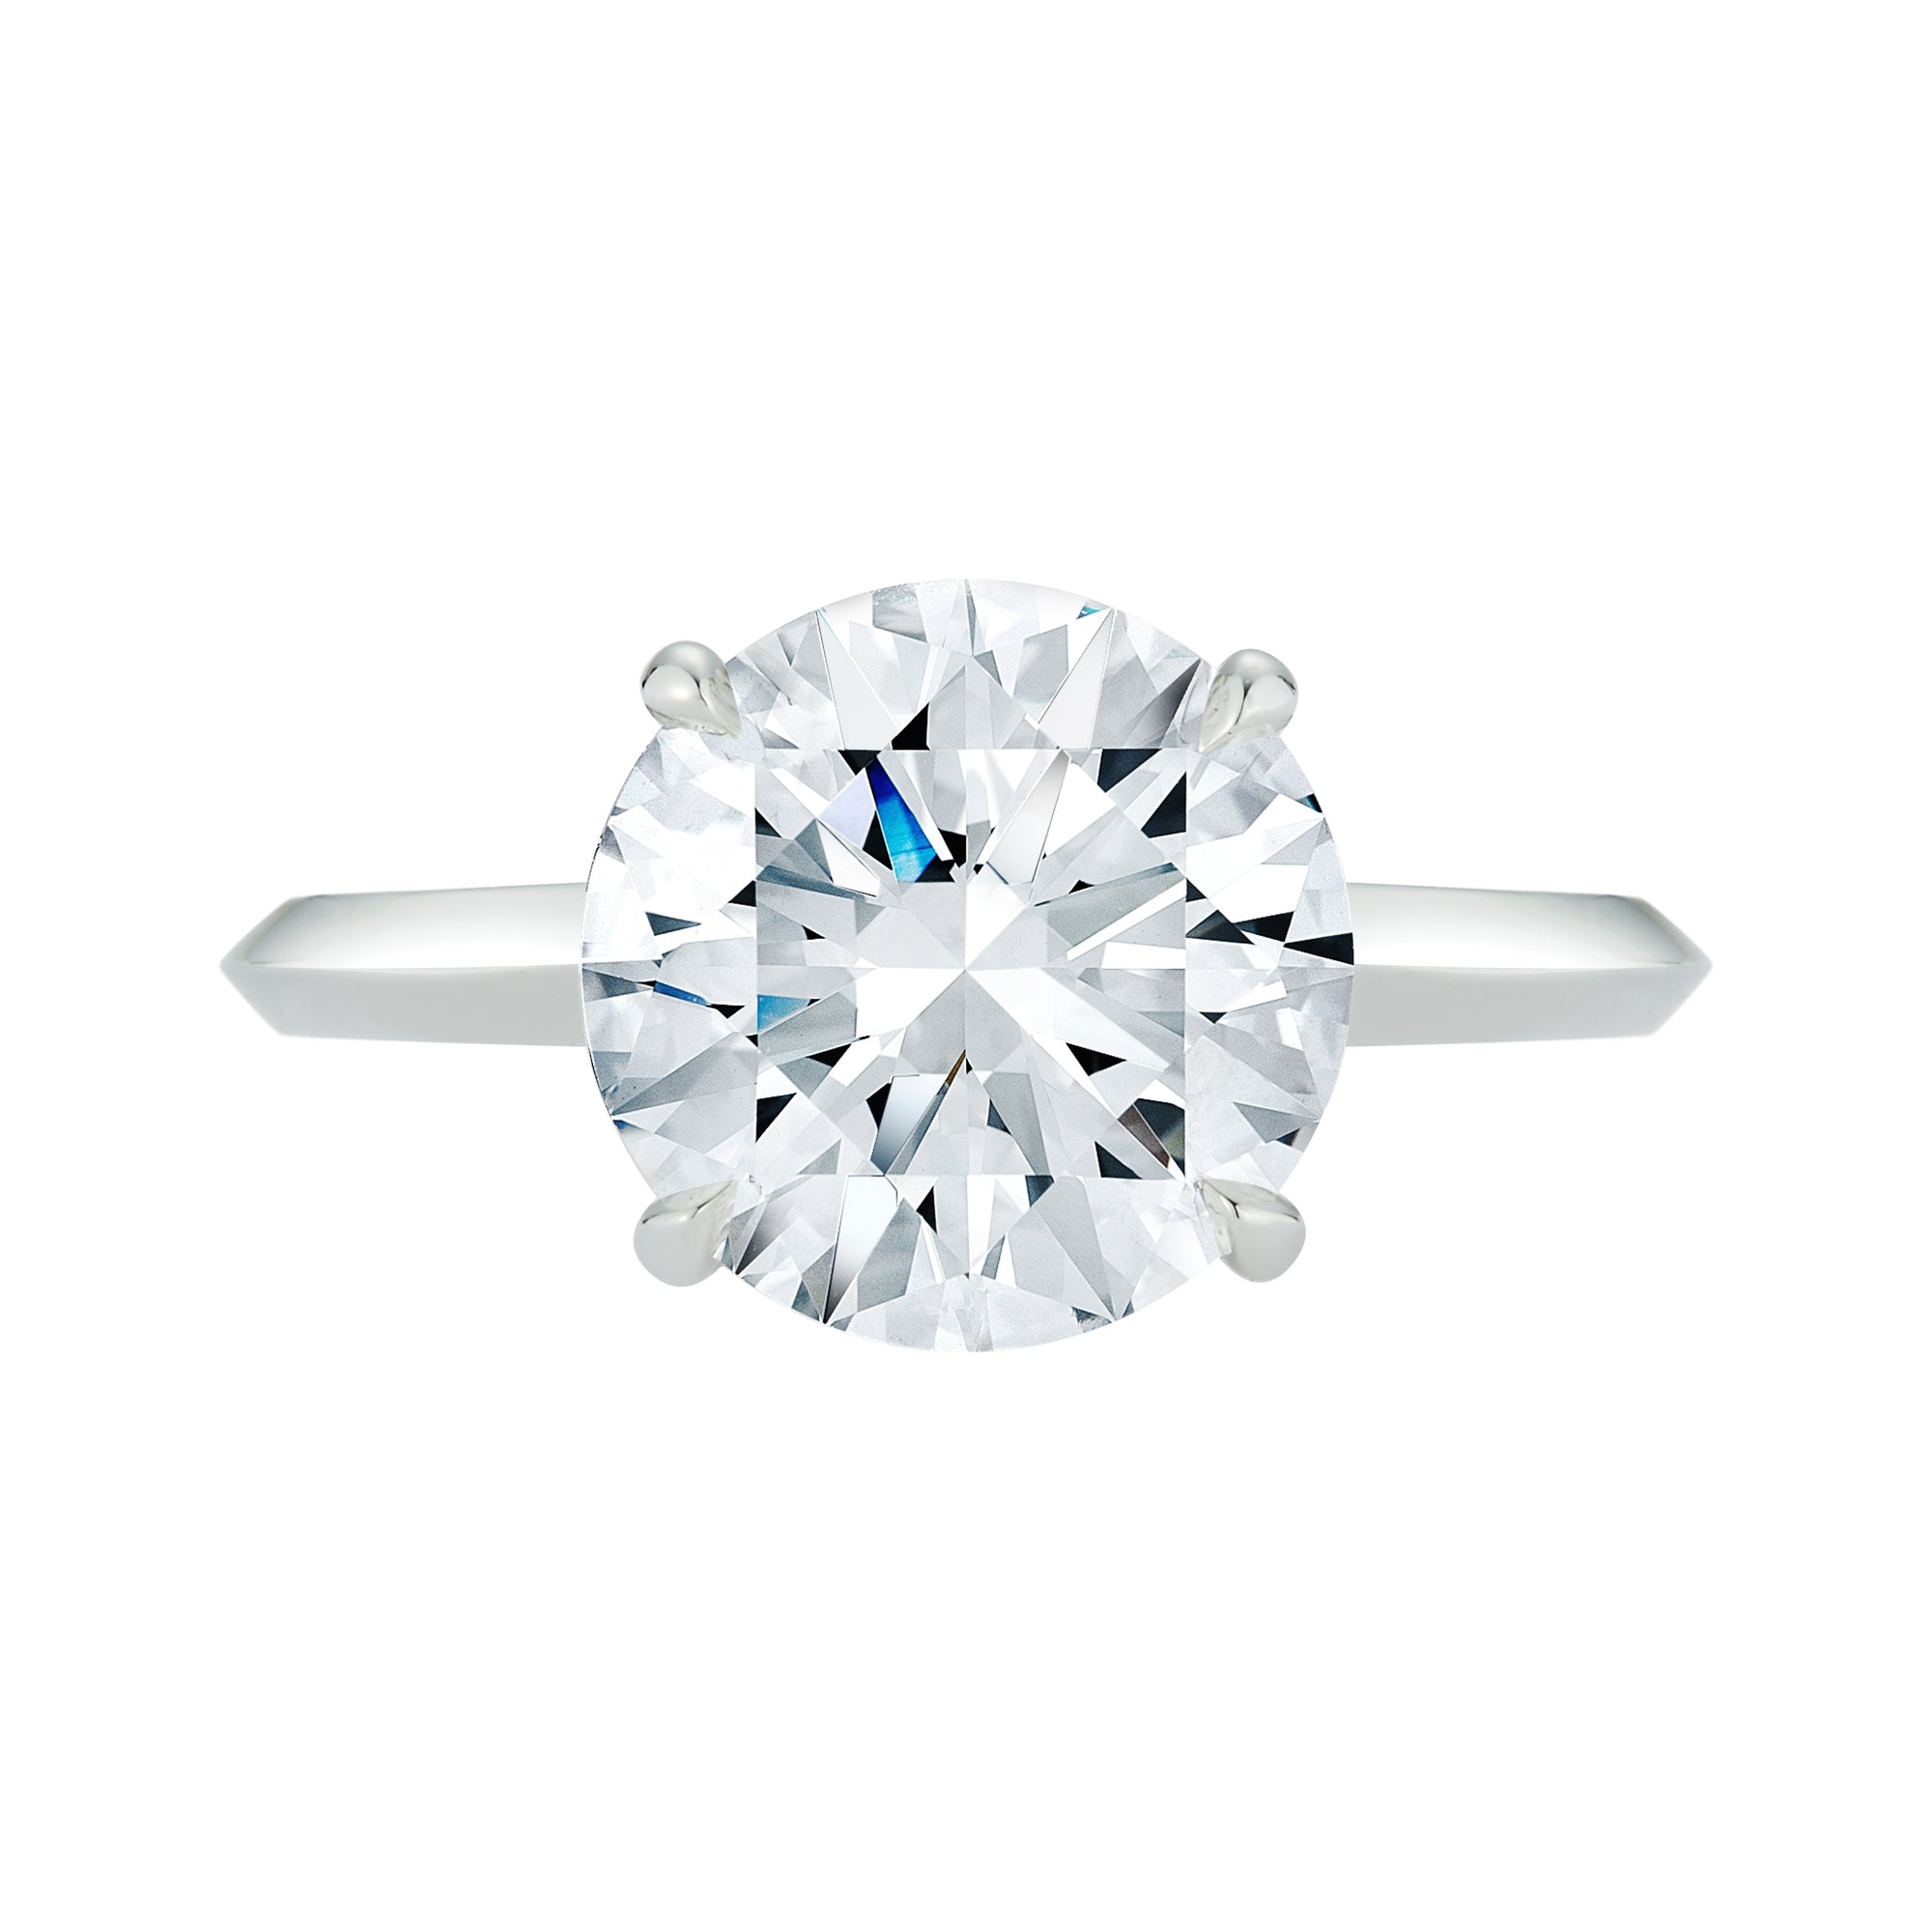 THE CLASSIC ENGAGEMENT RING